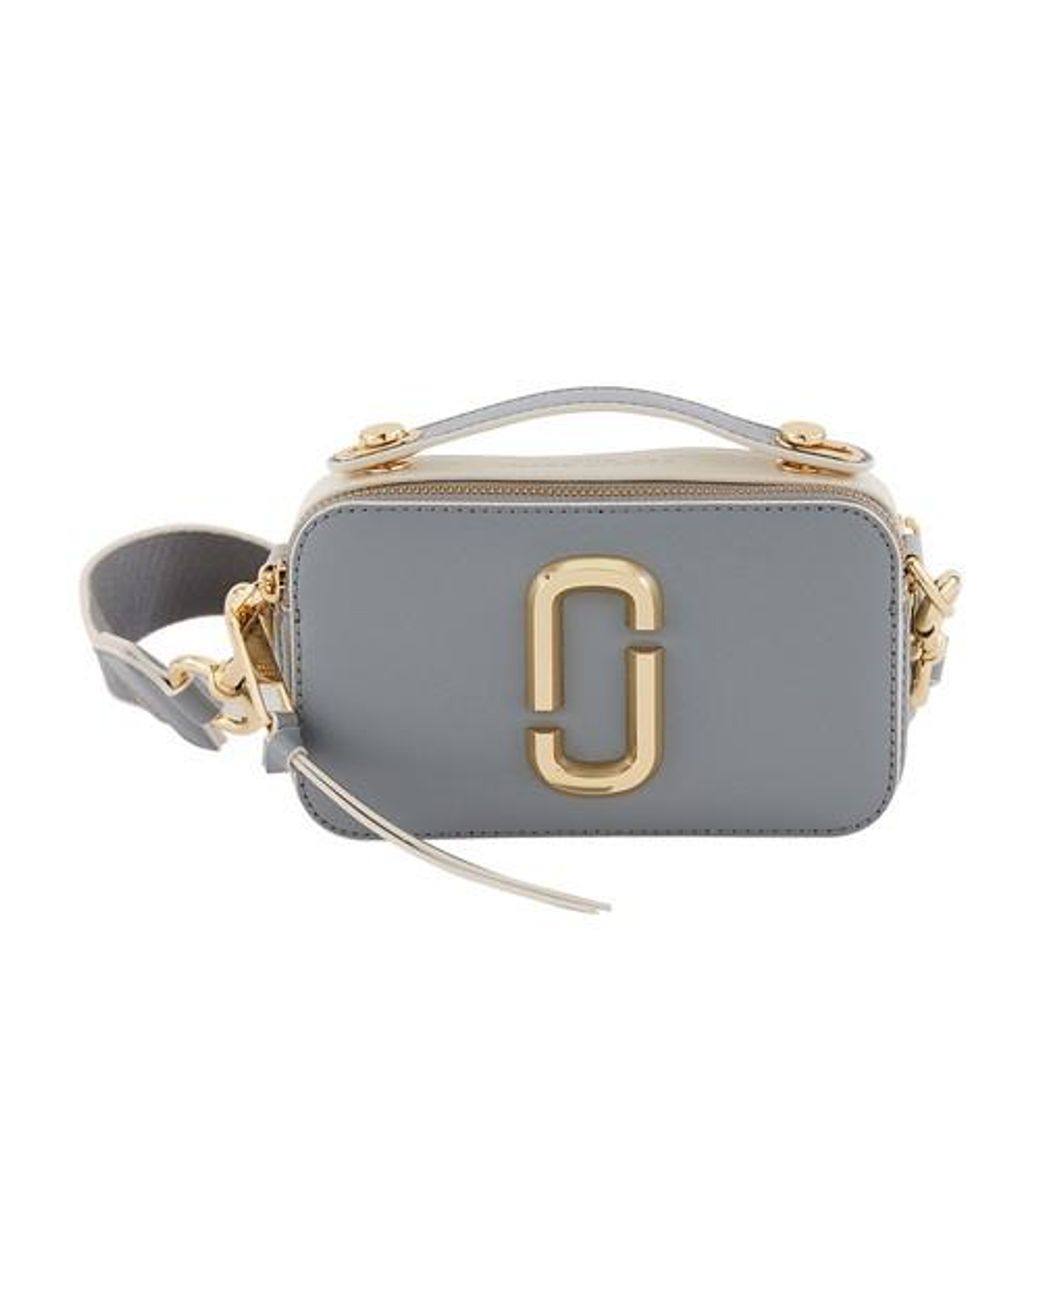 Marc Jacobs Snapshot Cross-body Bag With Handle in Gray